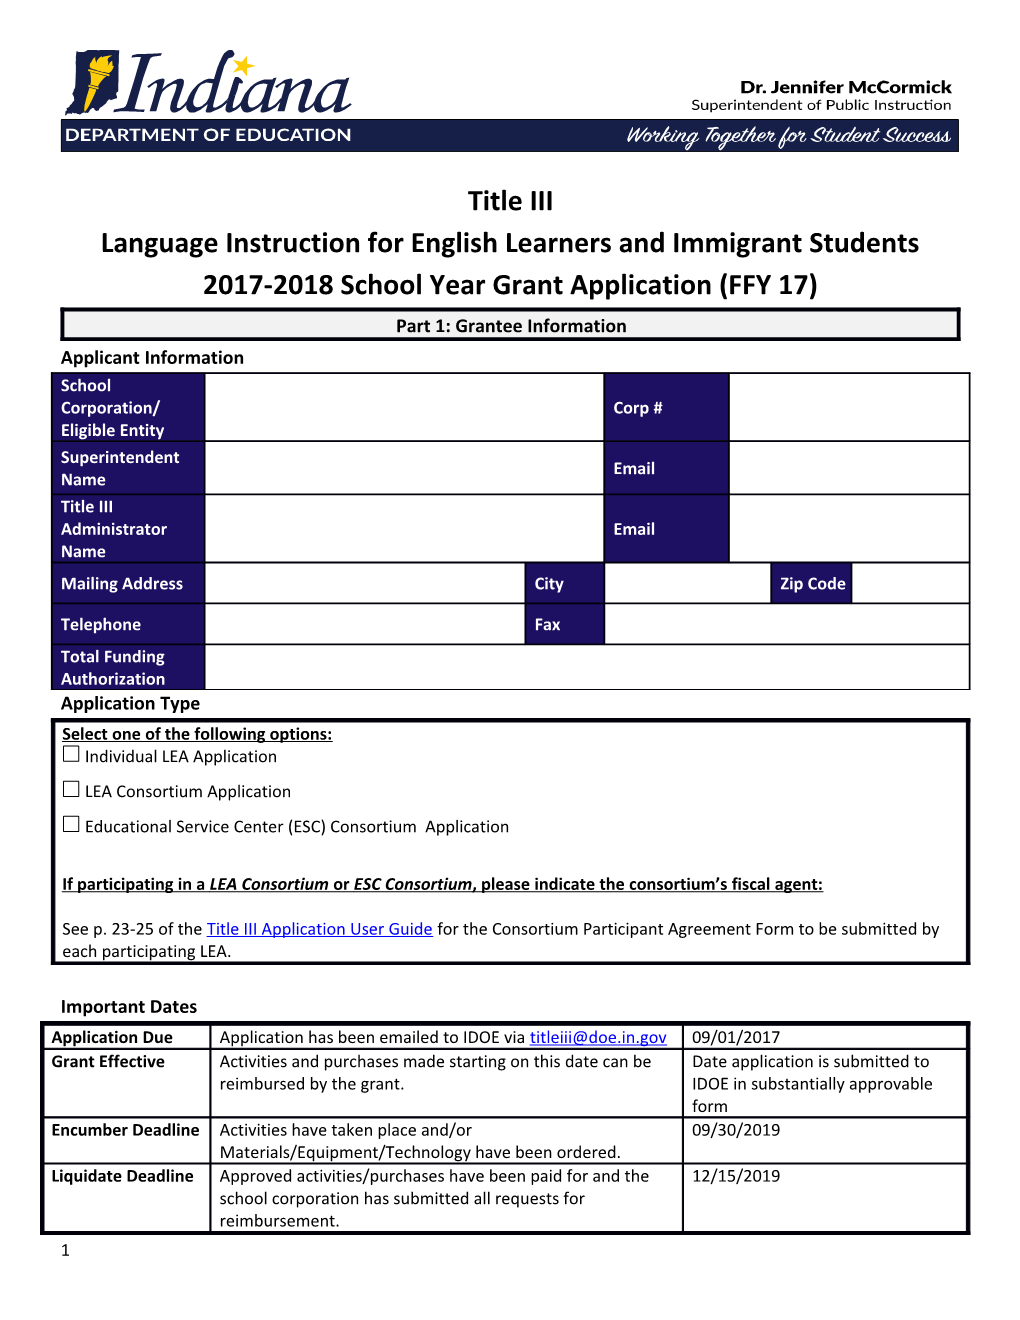 Language Instruction for English Learners and Immigrant Students